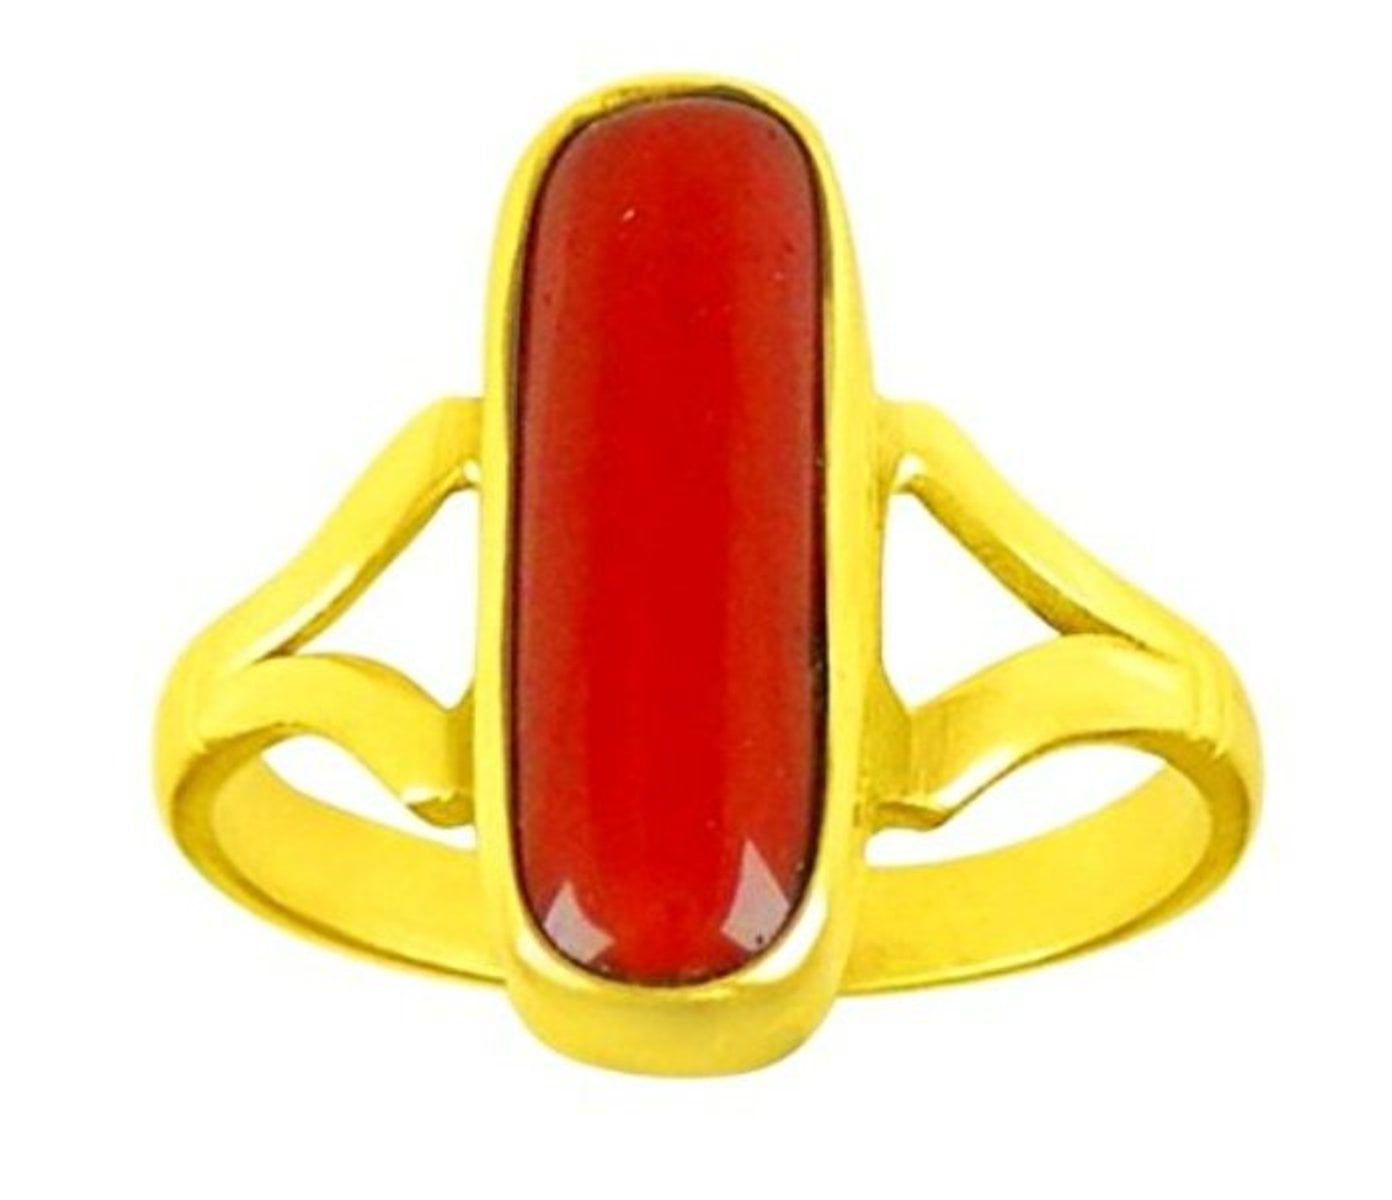 Buy Coral Ring Natural moonga Stone Certified Unheated Untreated  Astrological For Men Women Stone Coral Gold Plated Ring Online In India At  Discounted Prices